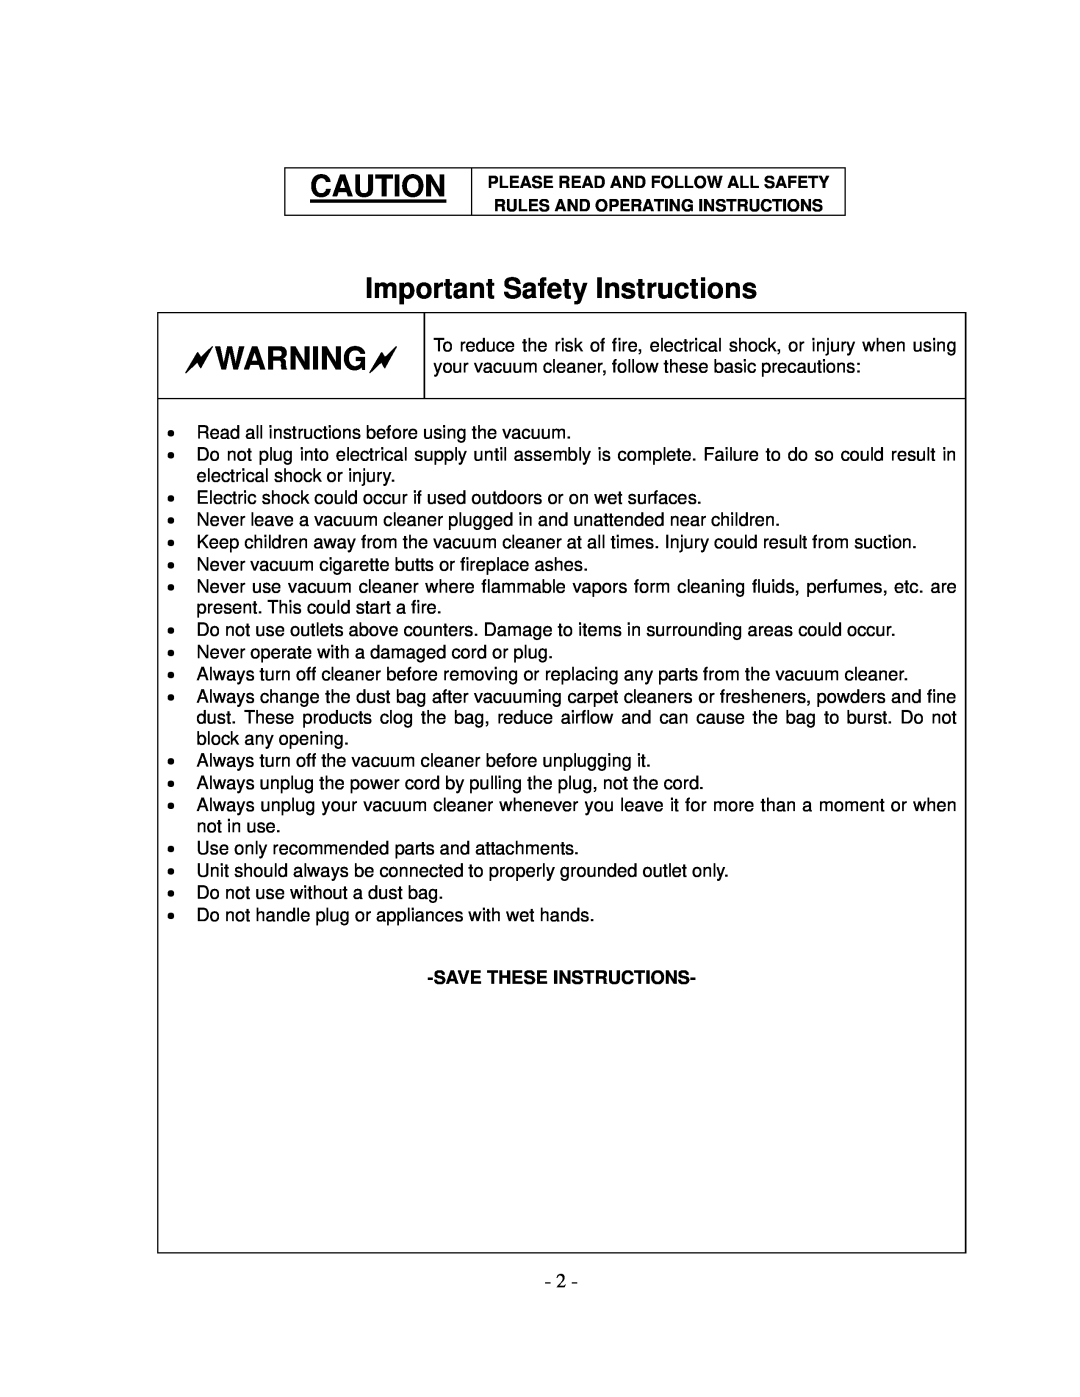 Sunbeam SBH-200 manual Important Safety Instructions, Savethese Instructions 